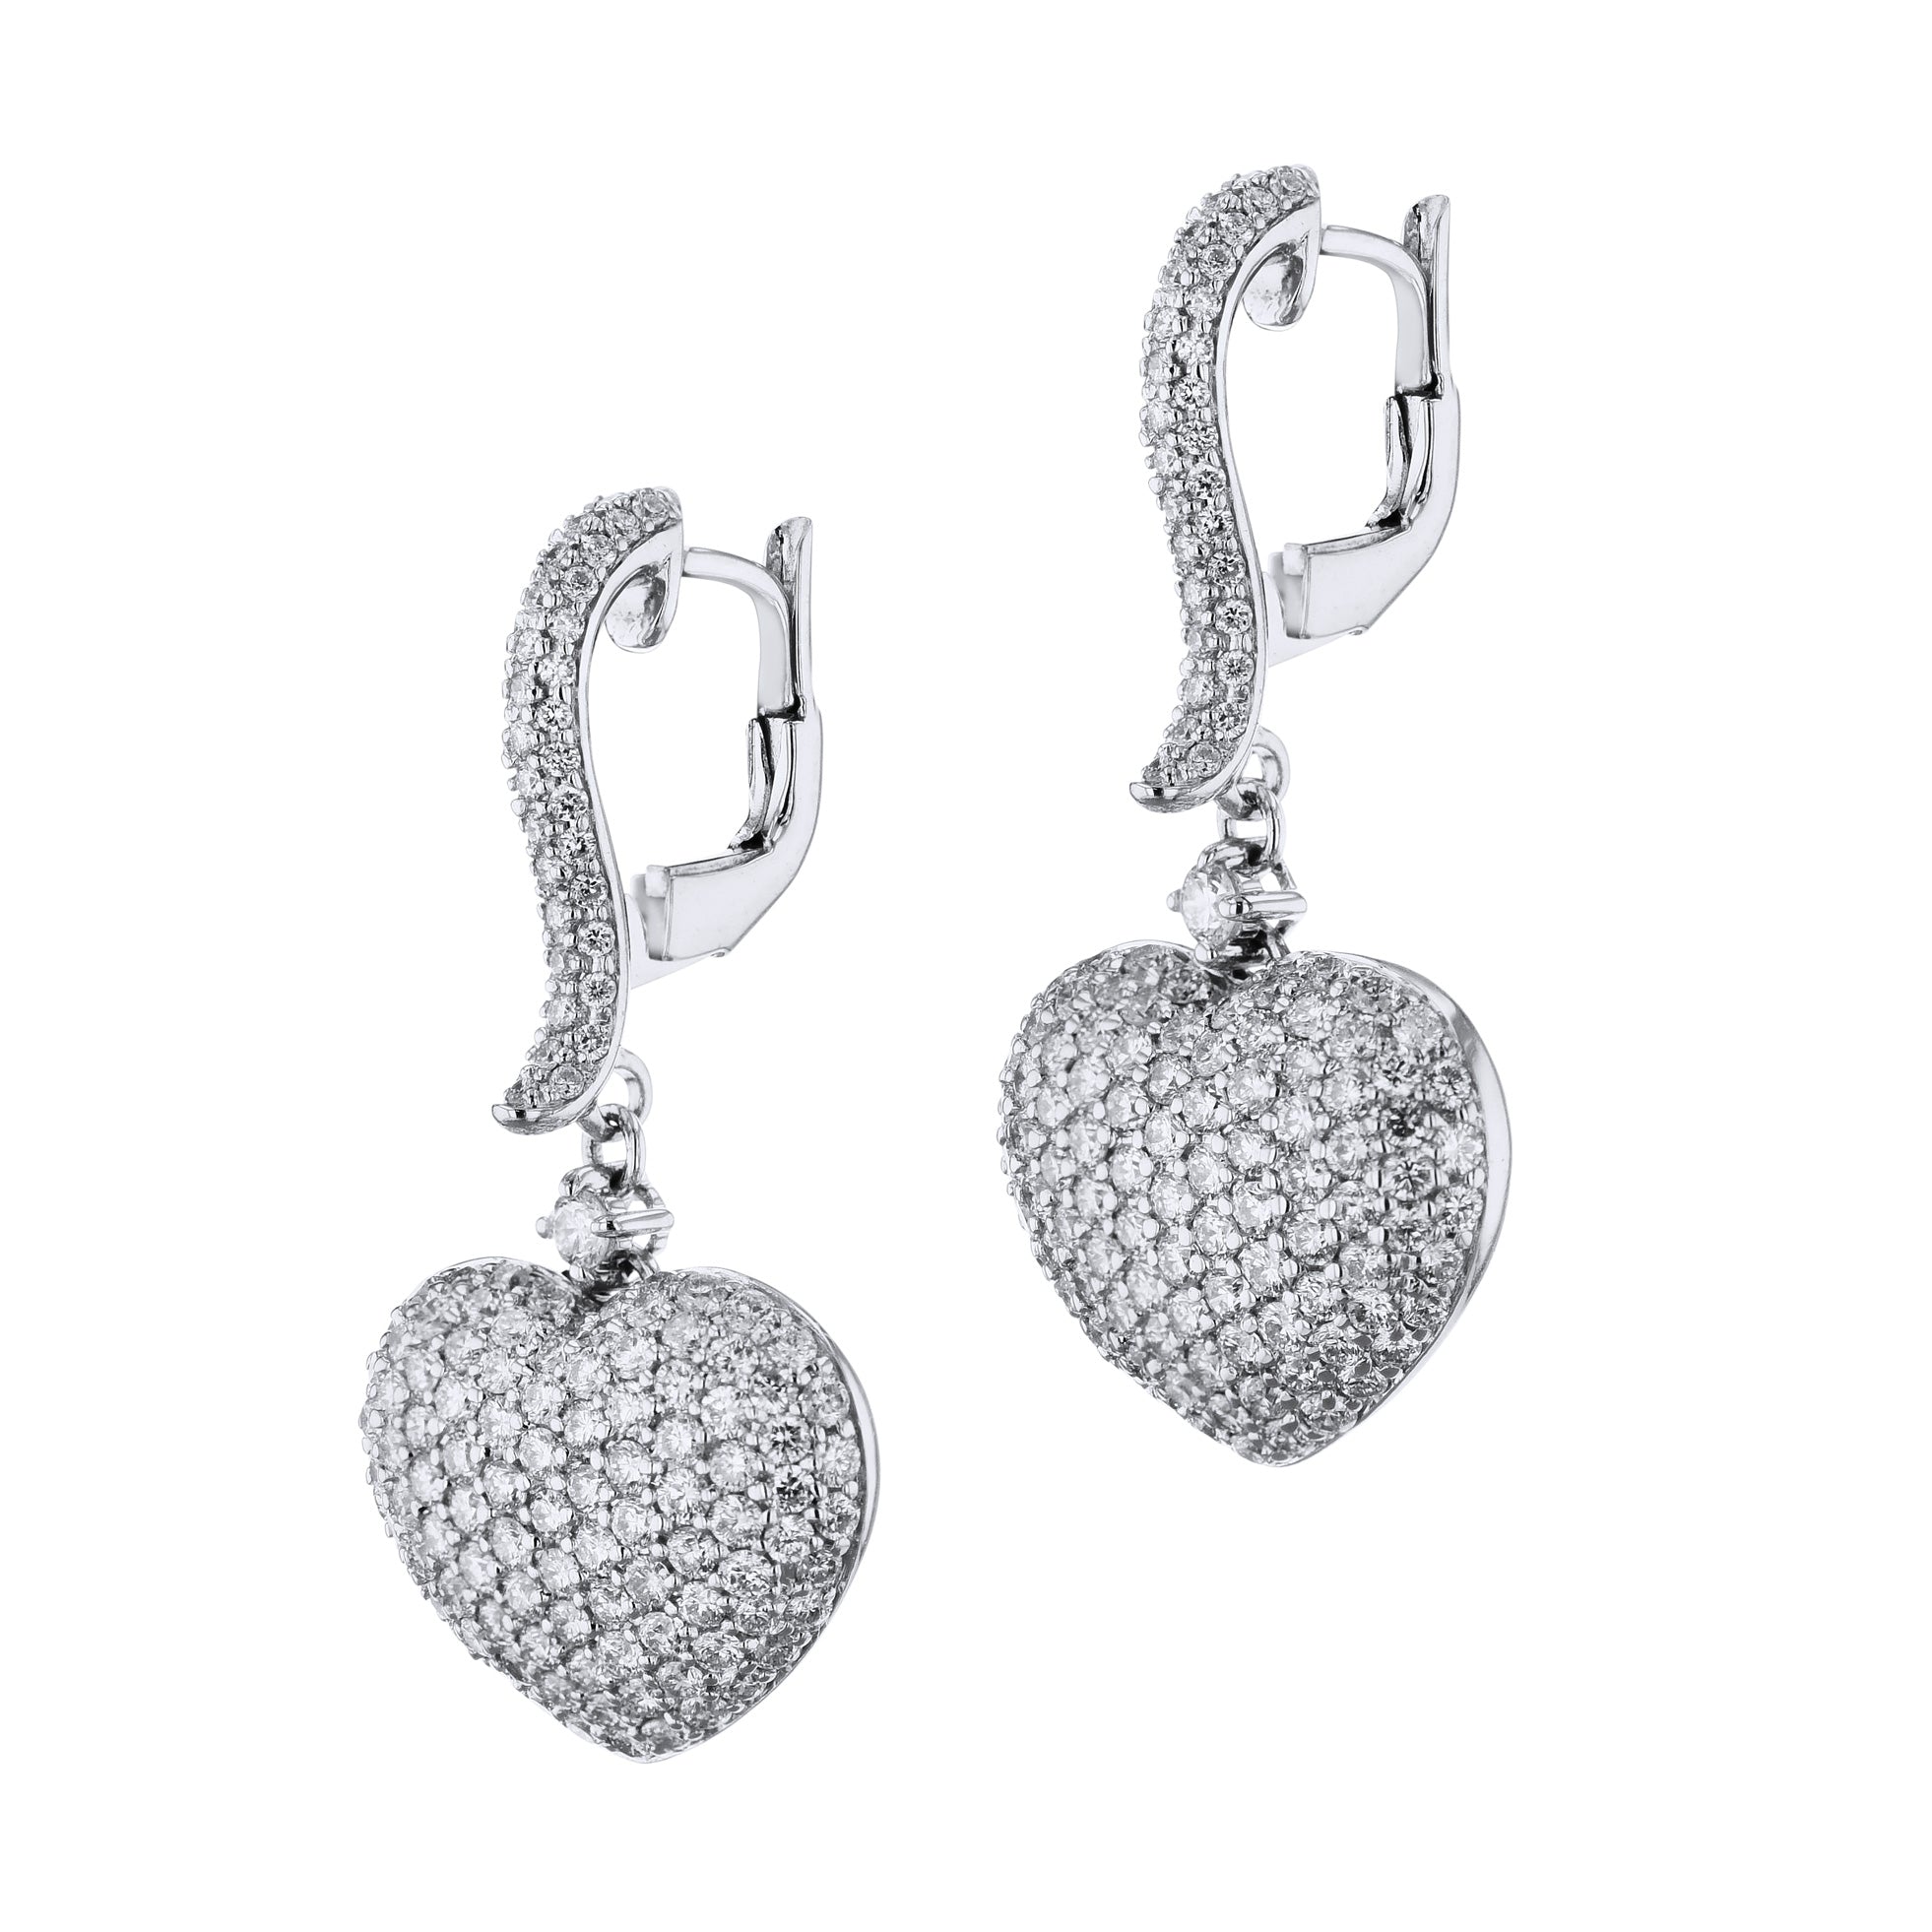 White Gold Heart Diamond Pave Drop Earrings Earrings Curated by H